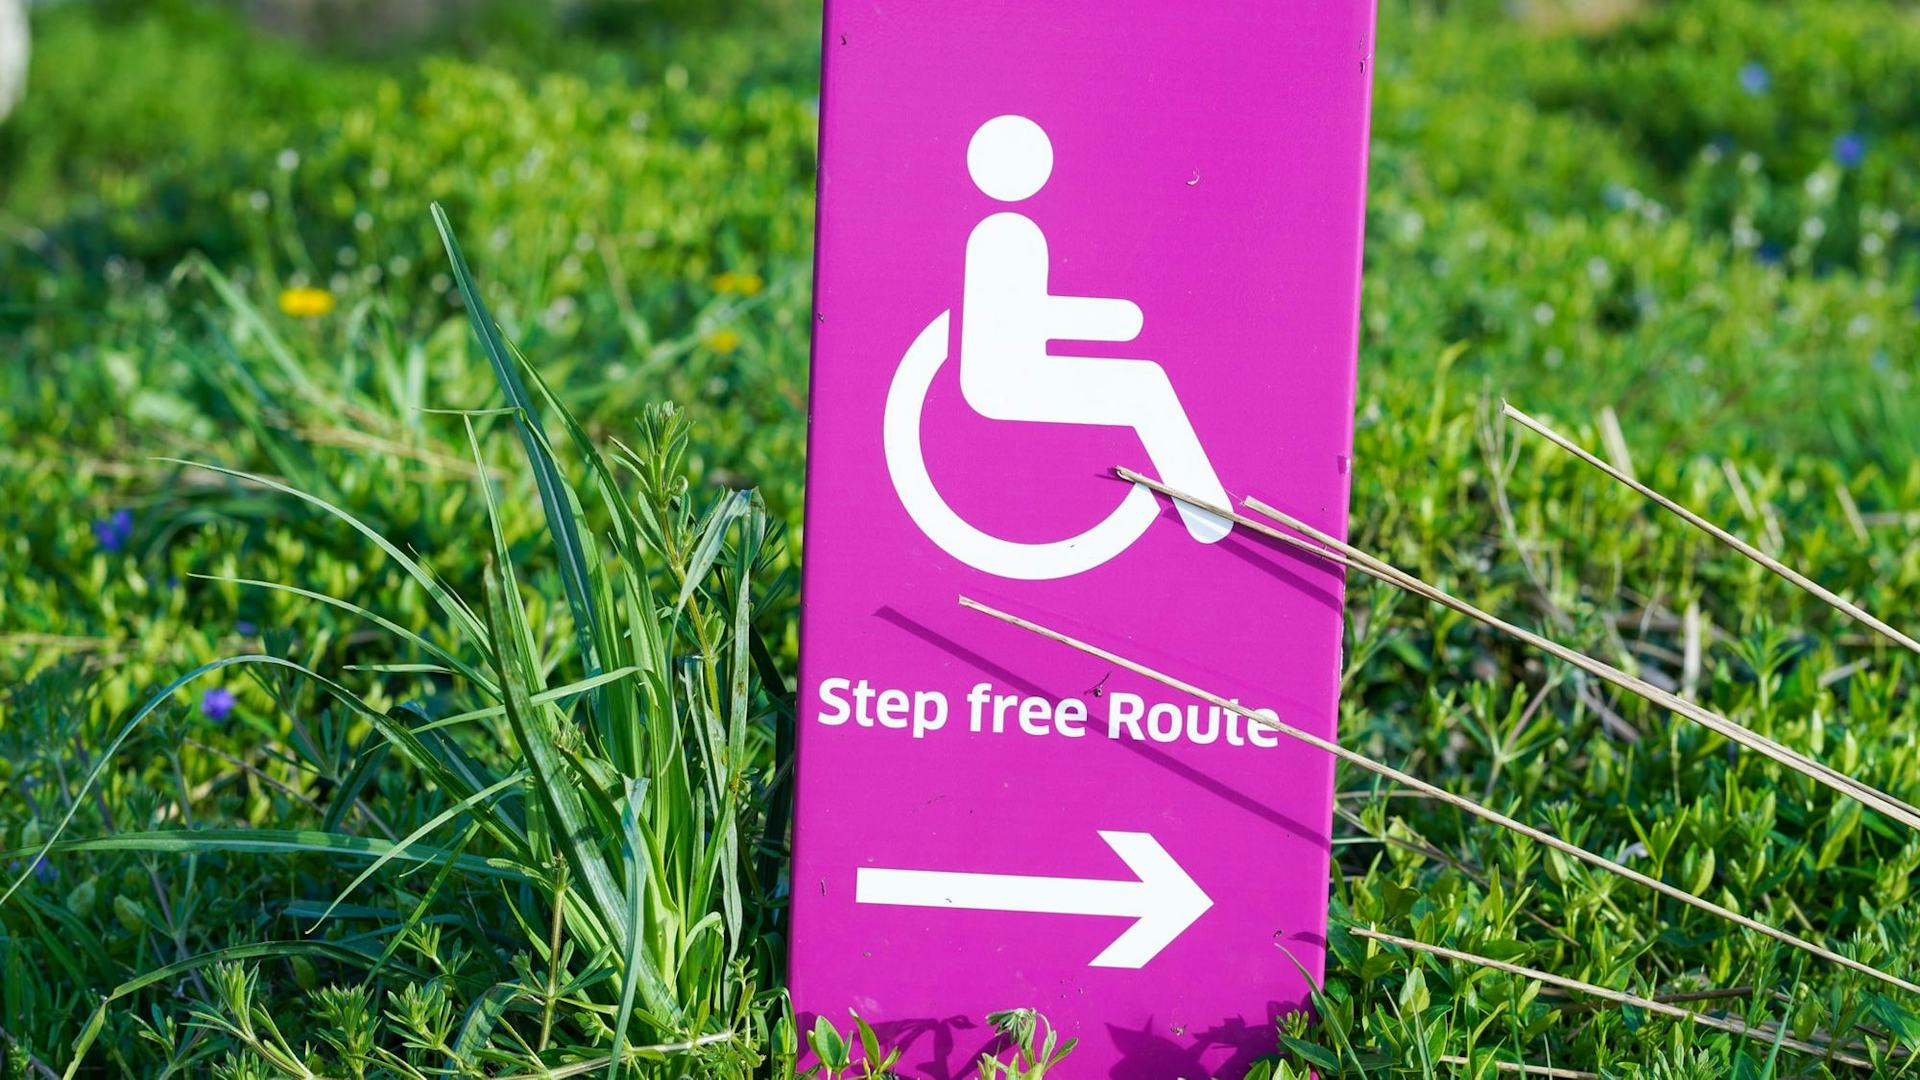 accessibility at events